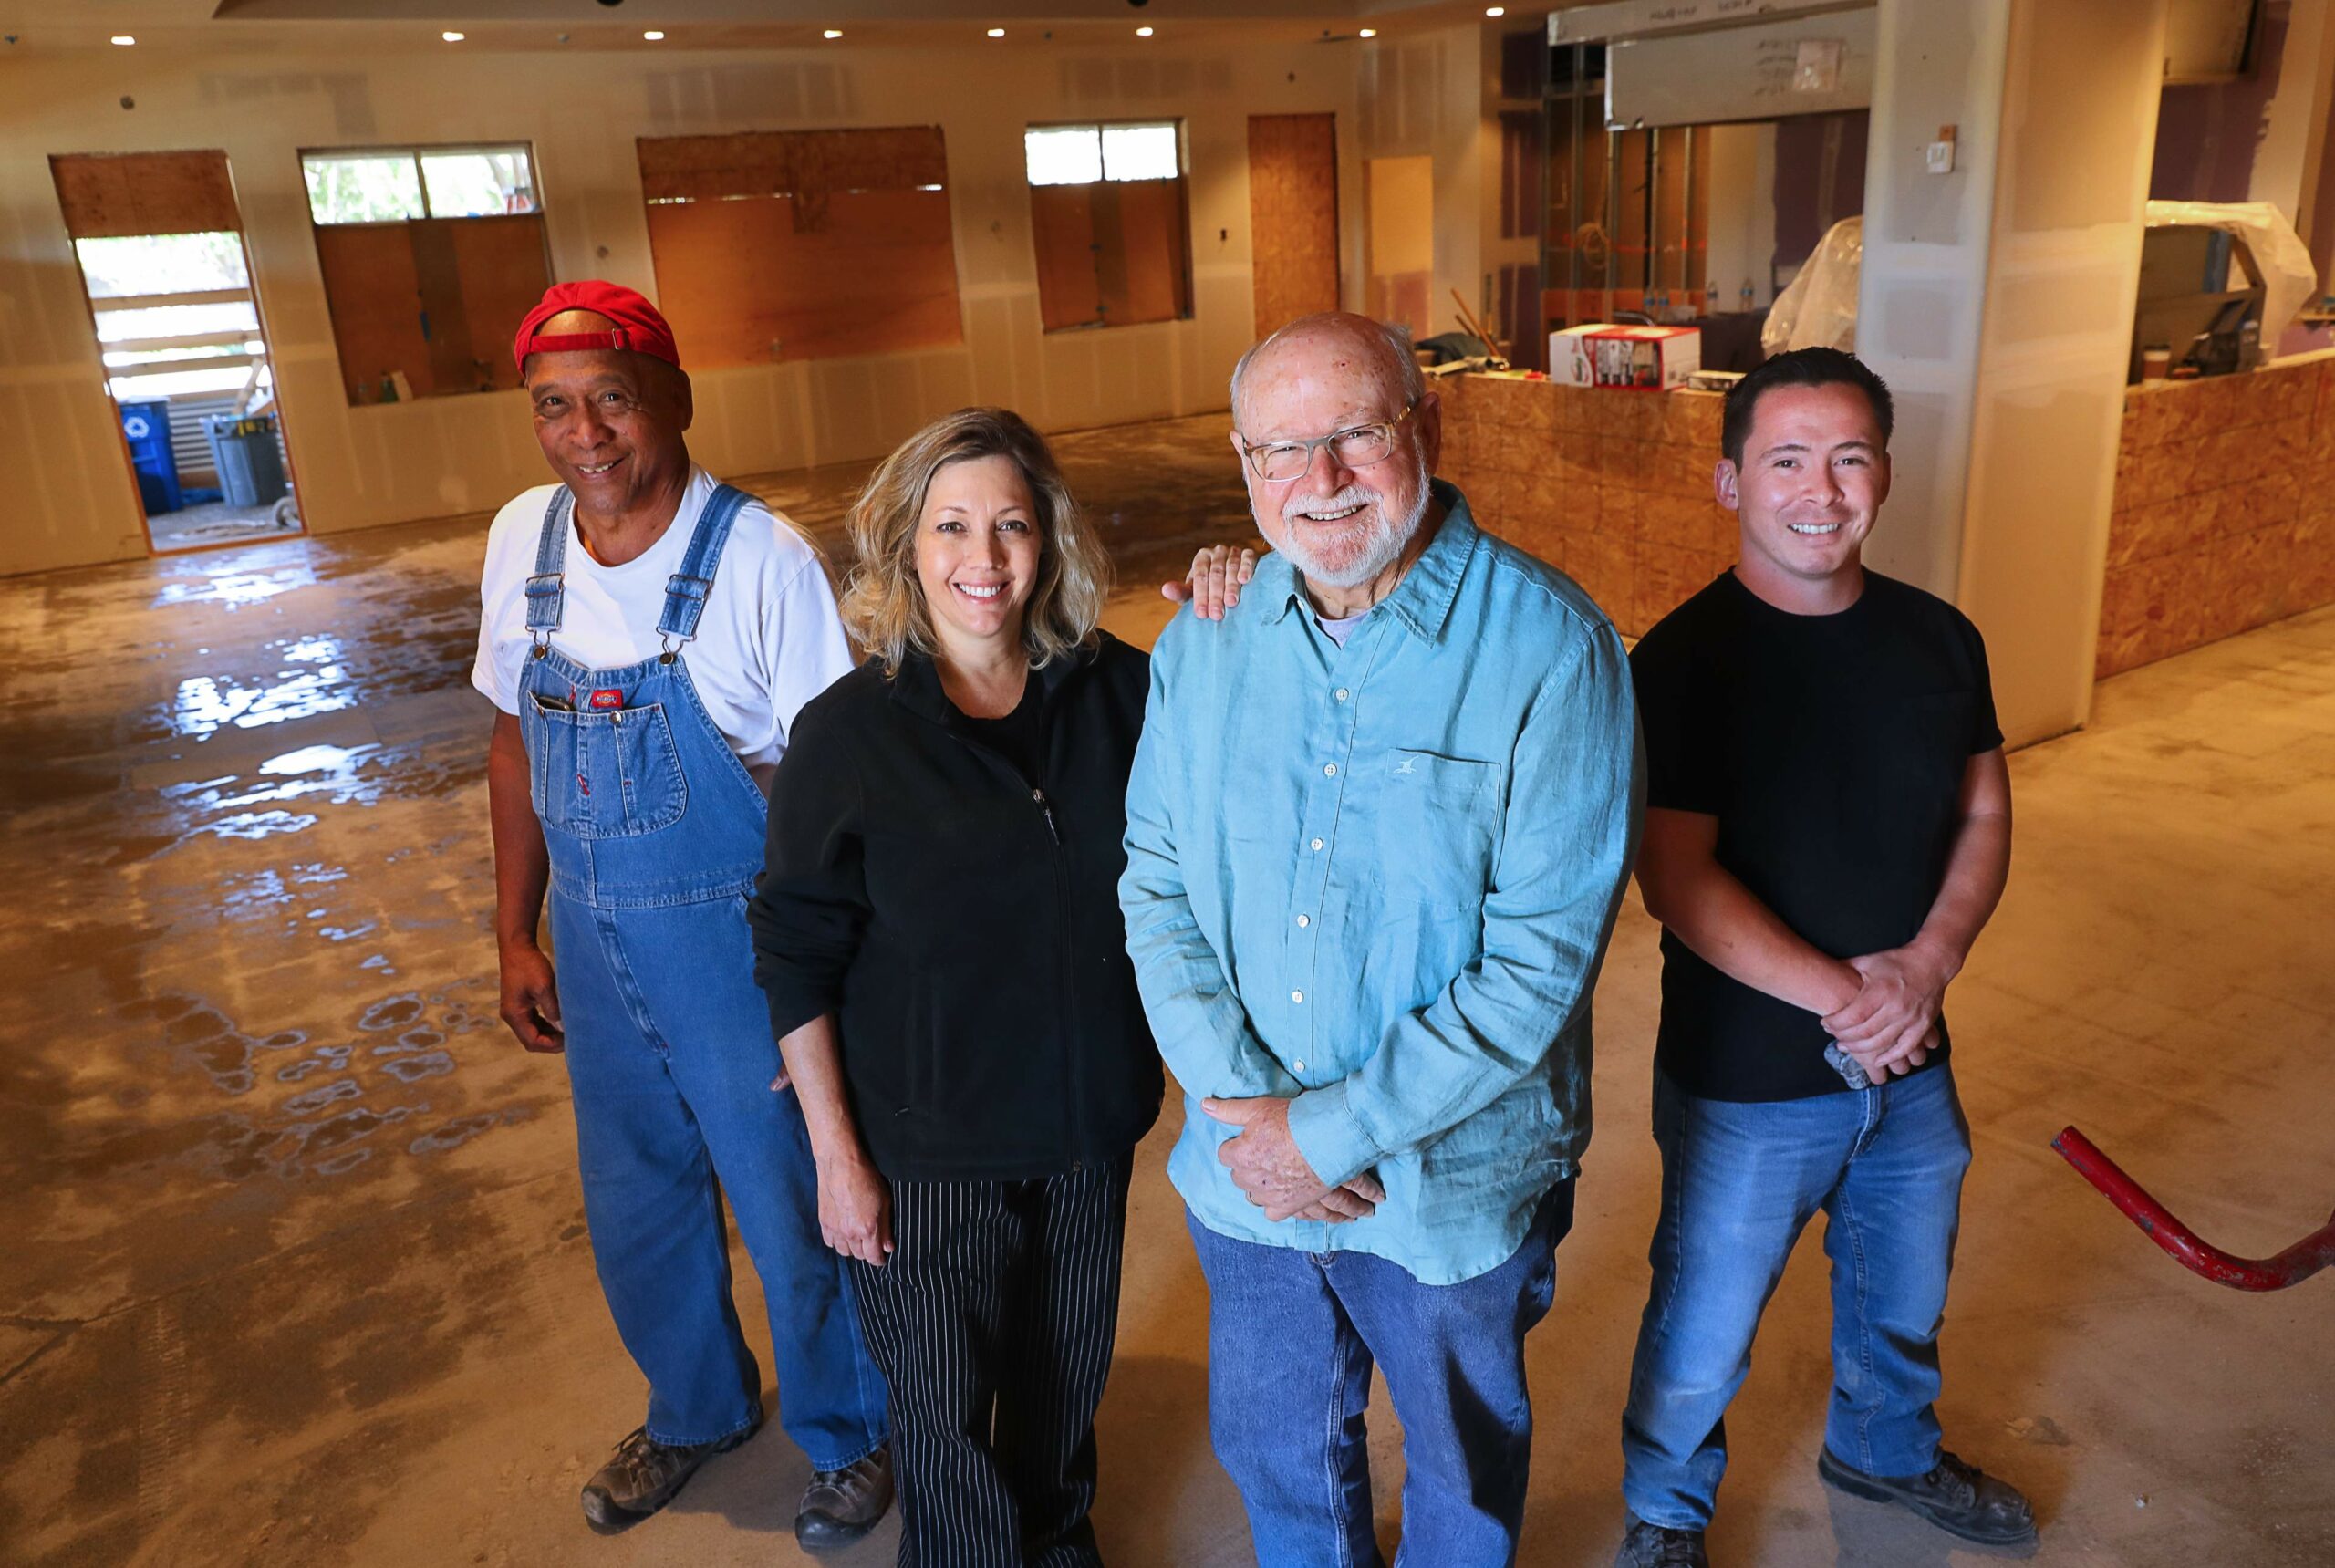 Sweet T's Restaurant & Bar owners Ann and Dennis Tussey, center, along with working partner George Ah Chin, left, and manager Robert Zenobi, right, at the site of their new Windsor location before construction was completed. The couple lost their Santa Rosa restaurant in the 2017 Tubbs fire. (Christopher Chung / The Press Democrat)